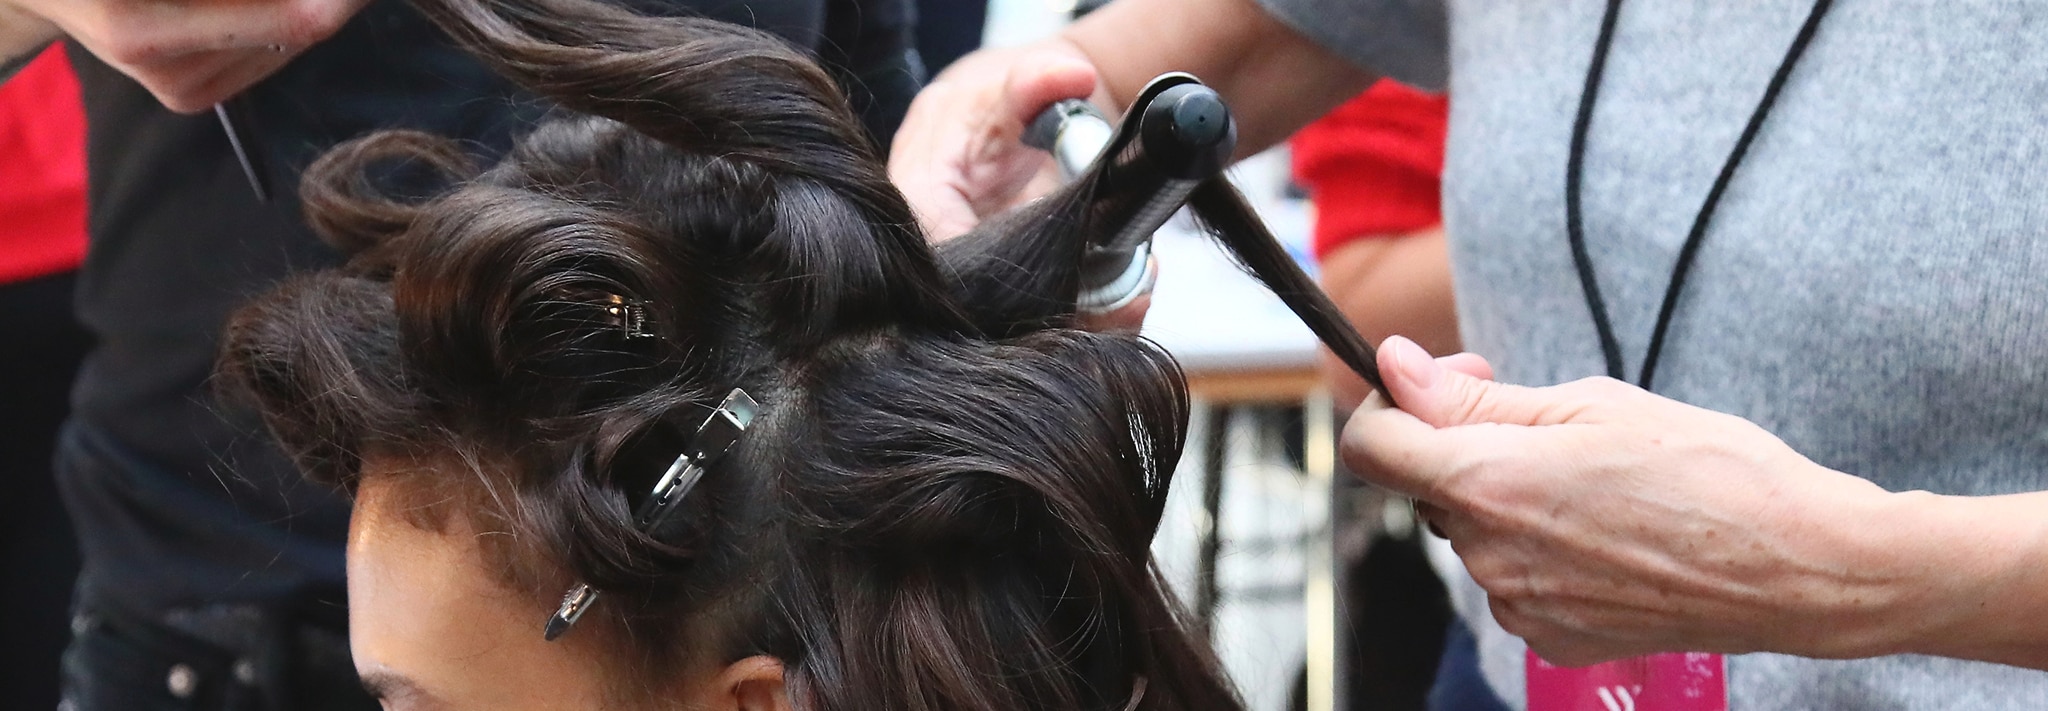 Close up of a heated styling tool being applied to a section of long dark hair.